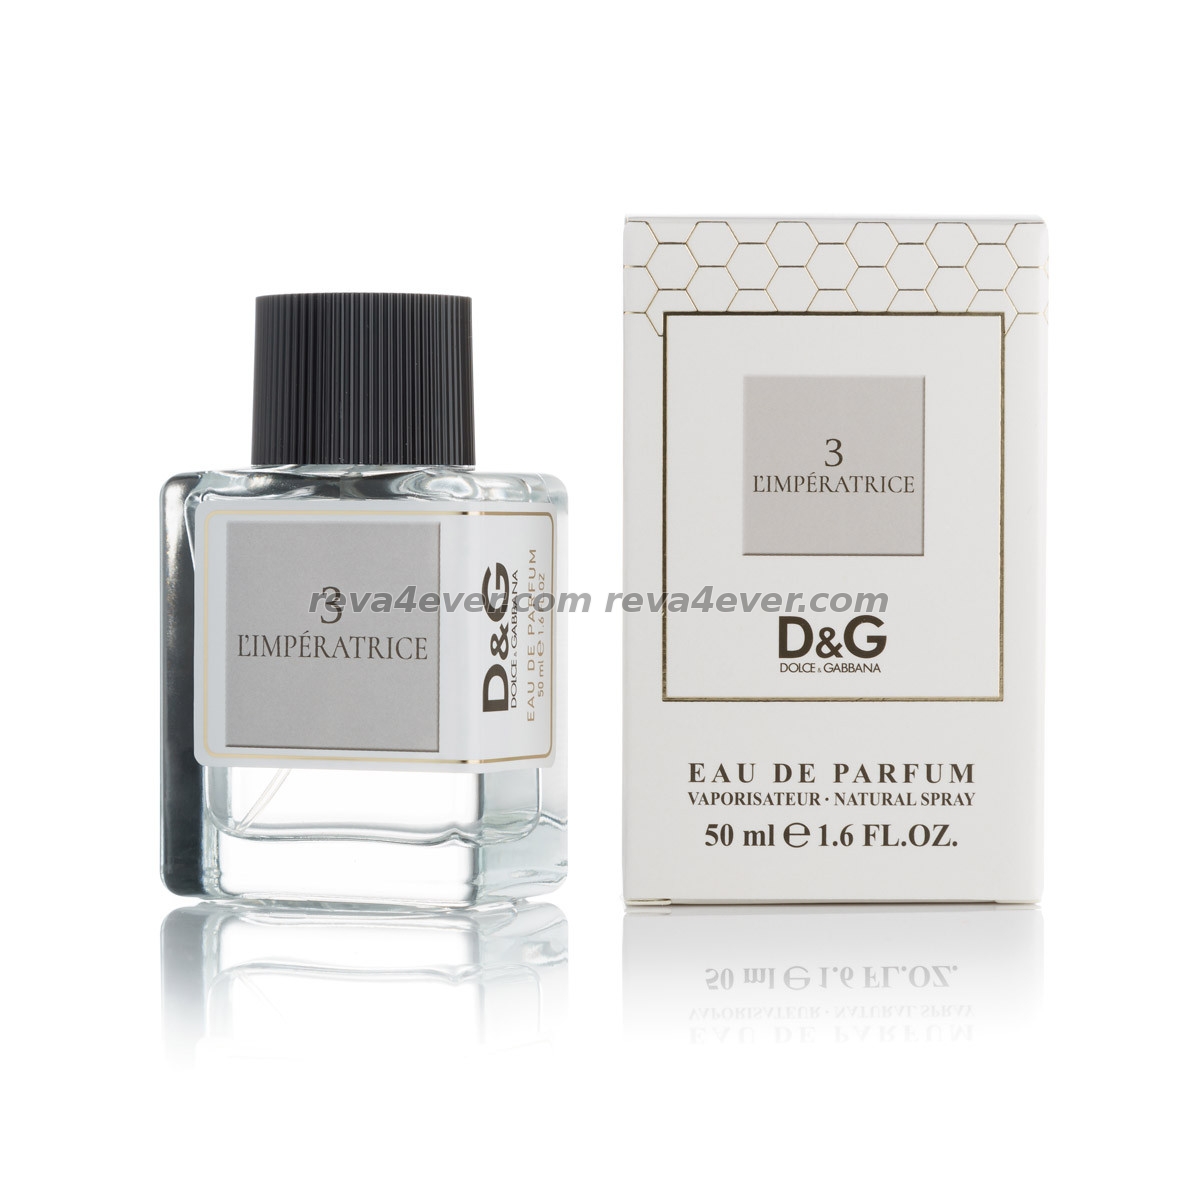 Dolce and Gabbana 3 L'Imperatrice edp 50 ml color box